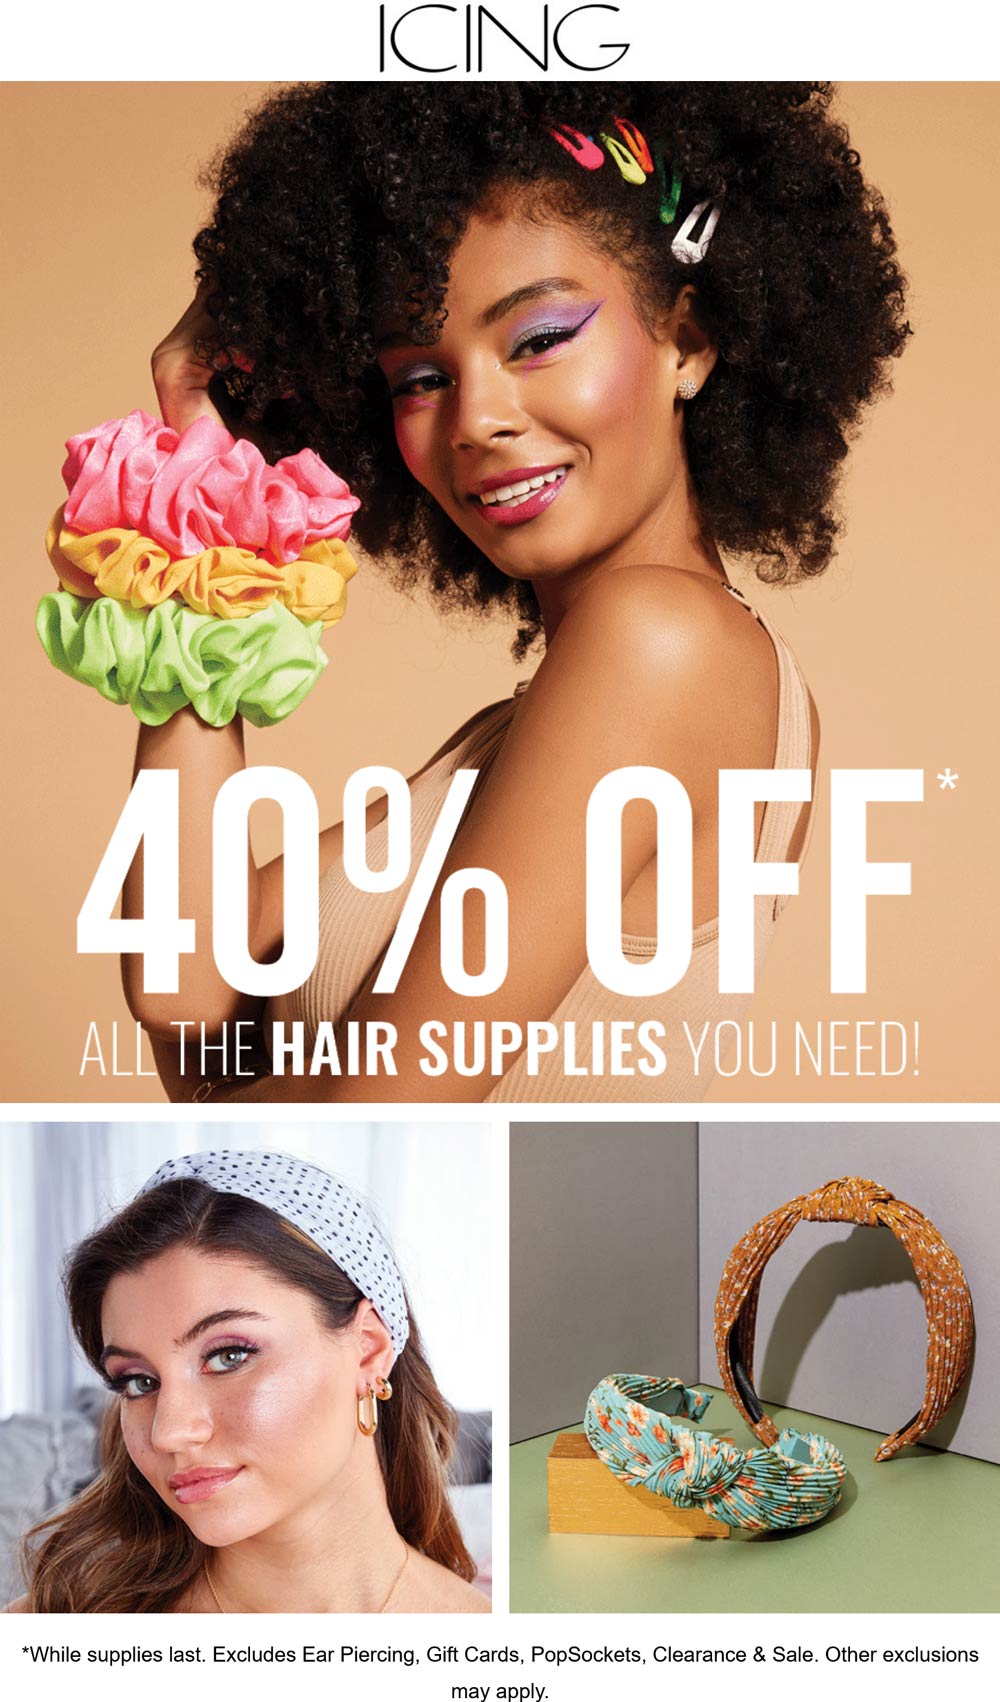 Icing stores Coupon  40% off hair supplies at Icing #icing 